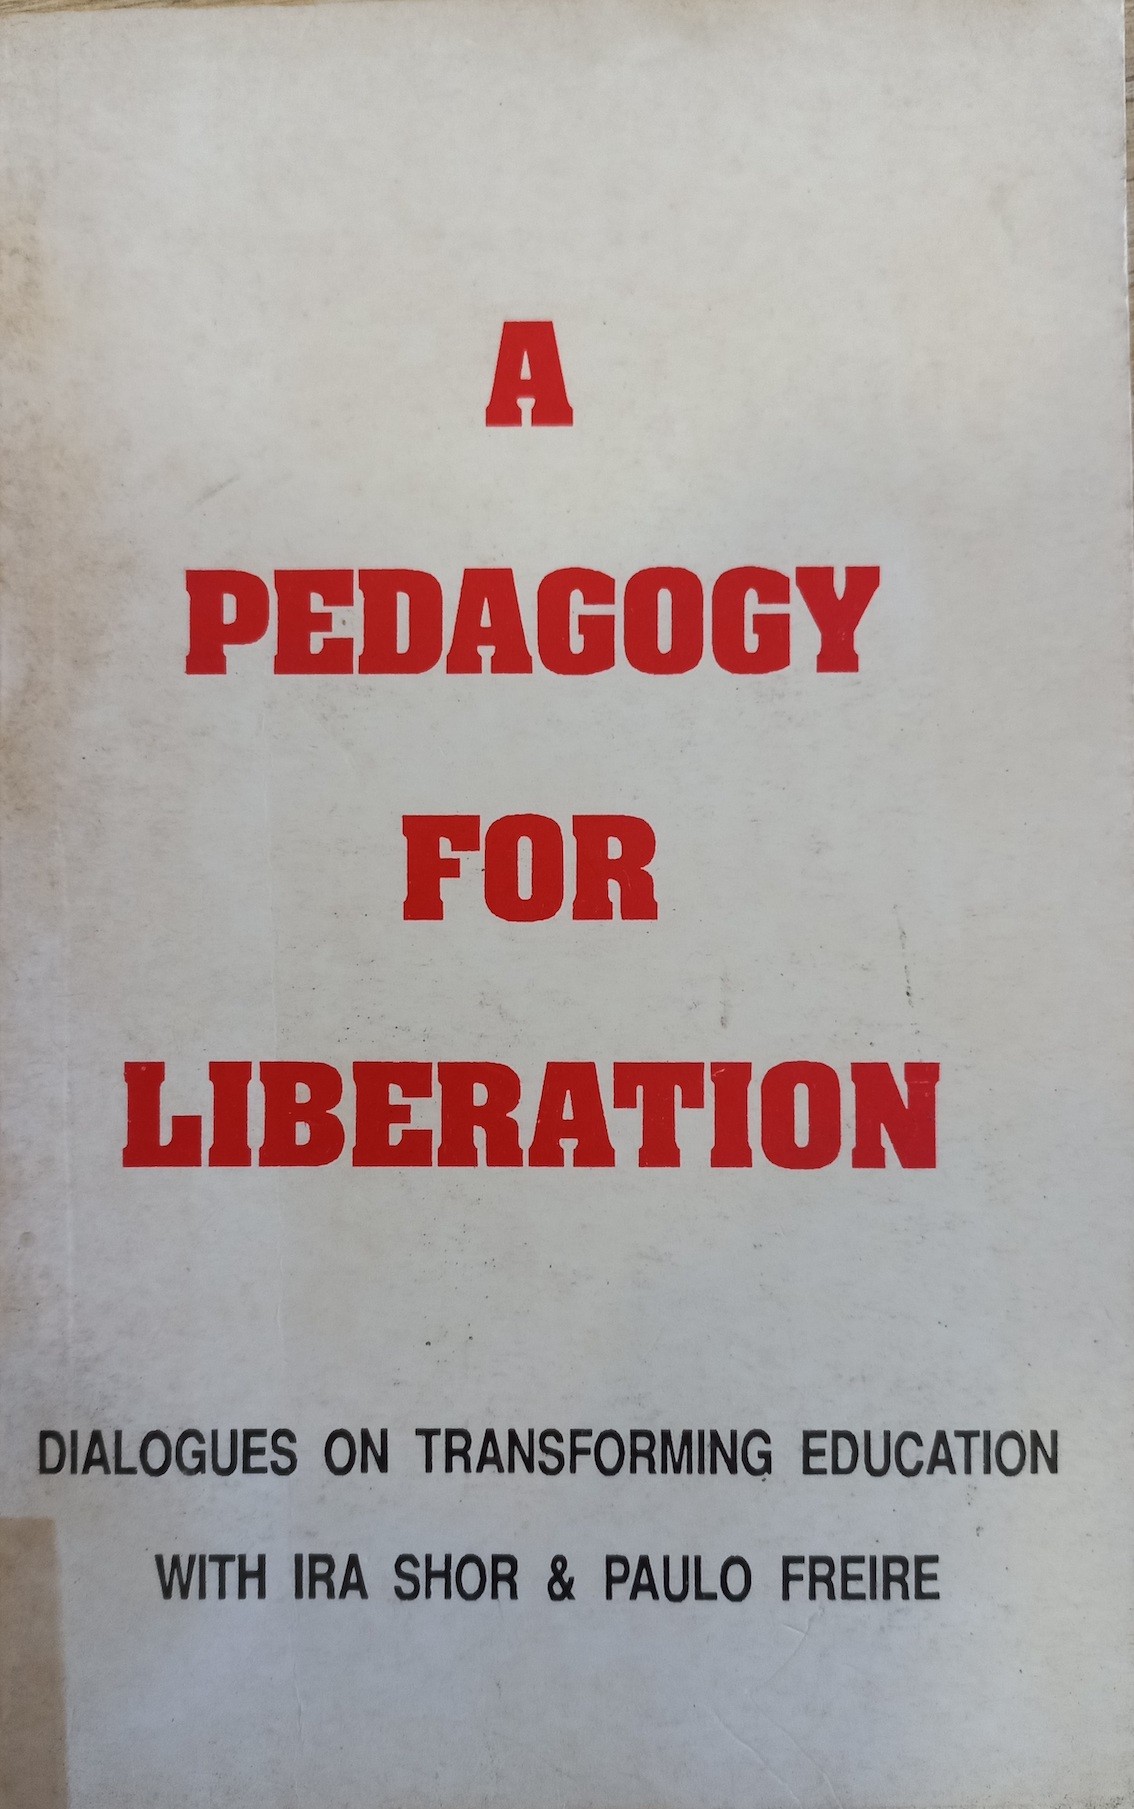 A Pedagogy For Liberation: Dialogues on Transforming Education